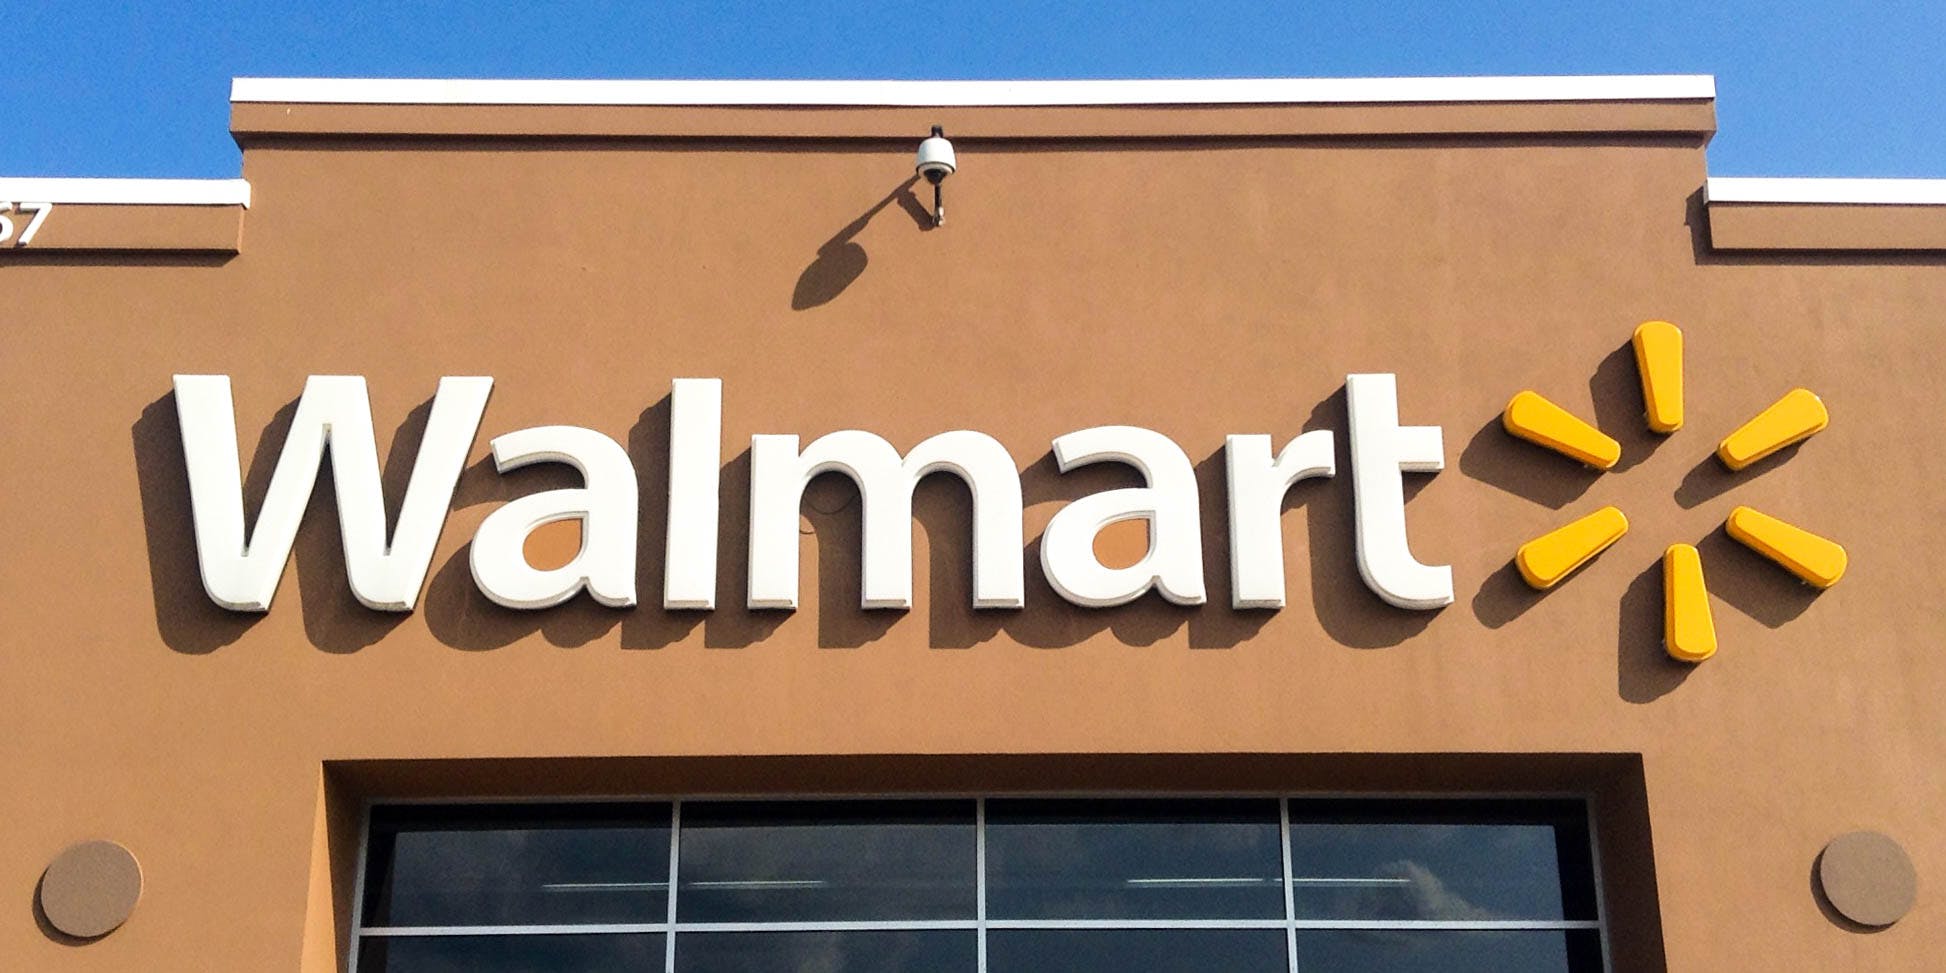 Walmart Considers Selling Cannabis-Infused Products. Here, the exterior of a walmart is shown